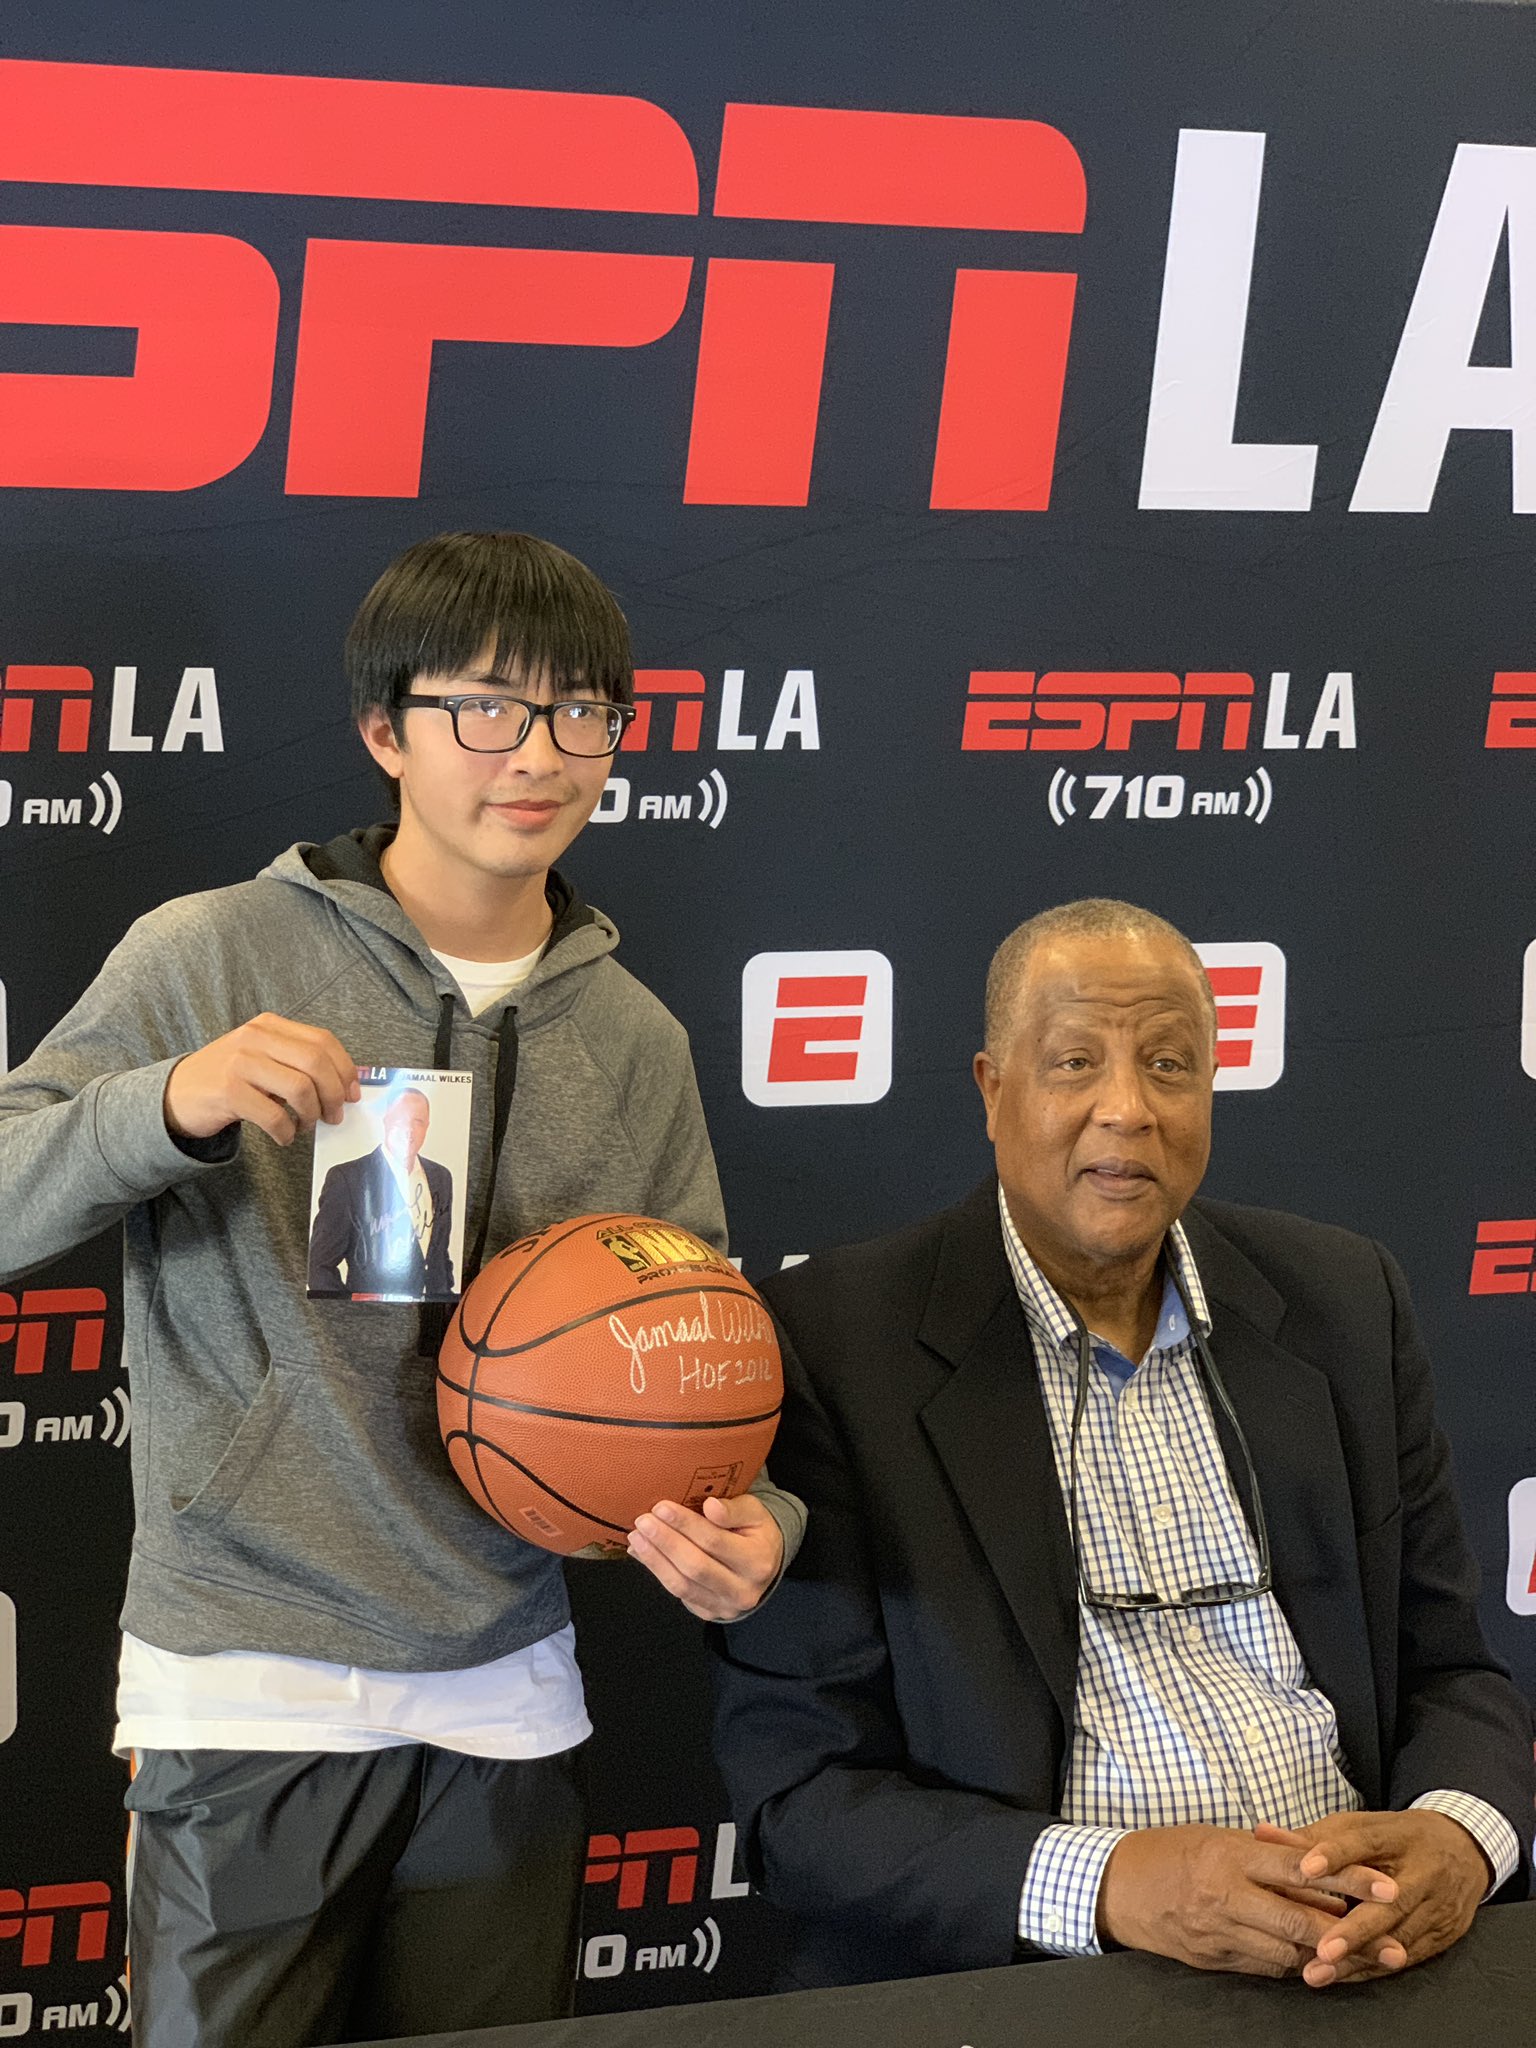 Jamaal Wilkes Talks About How He Was Chosen For The Legendary Film